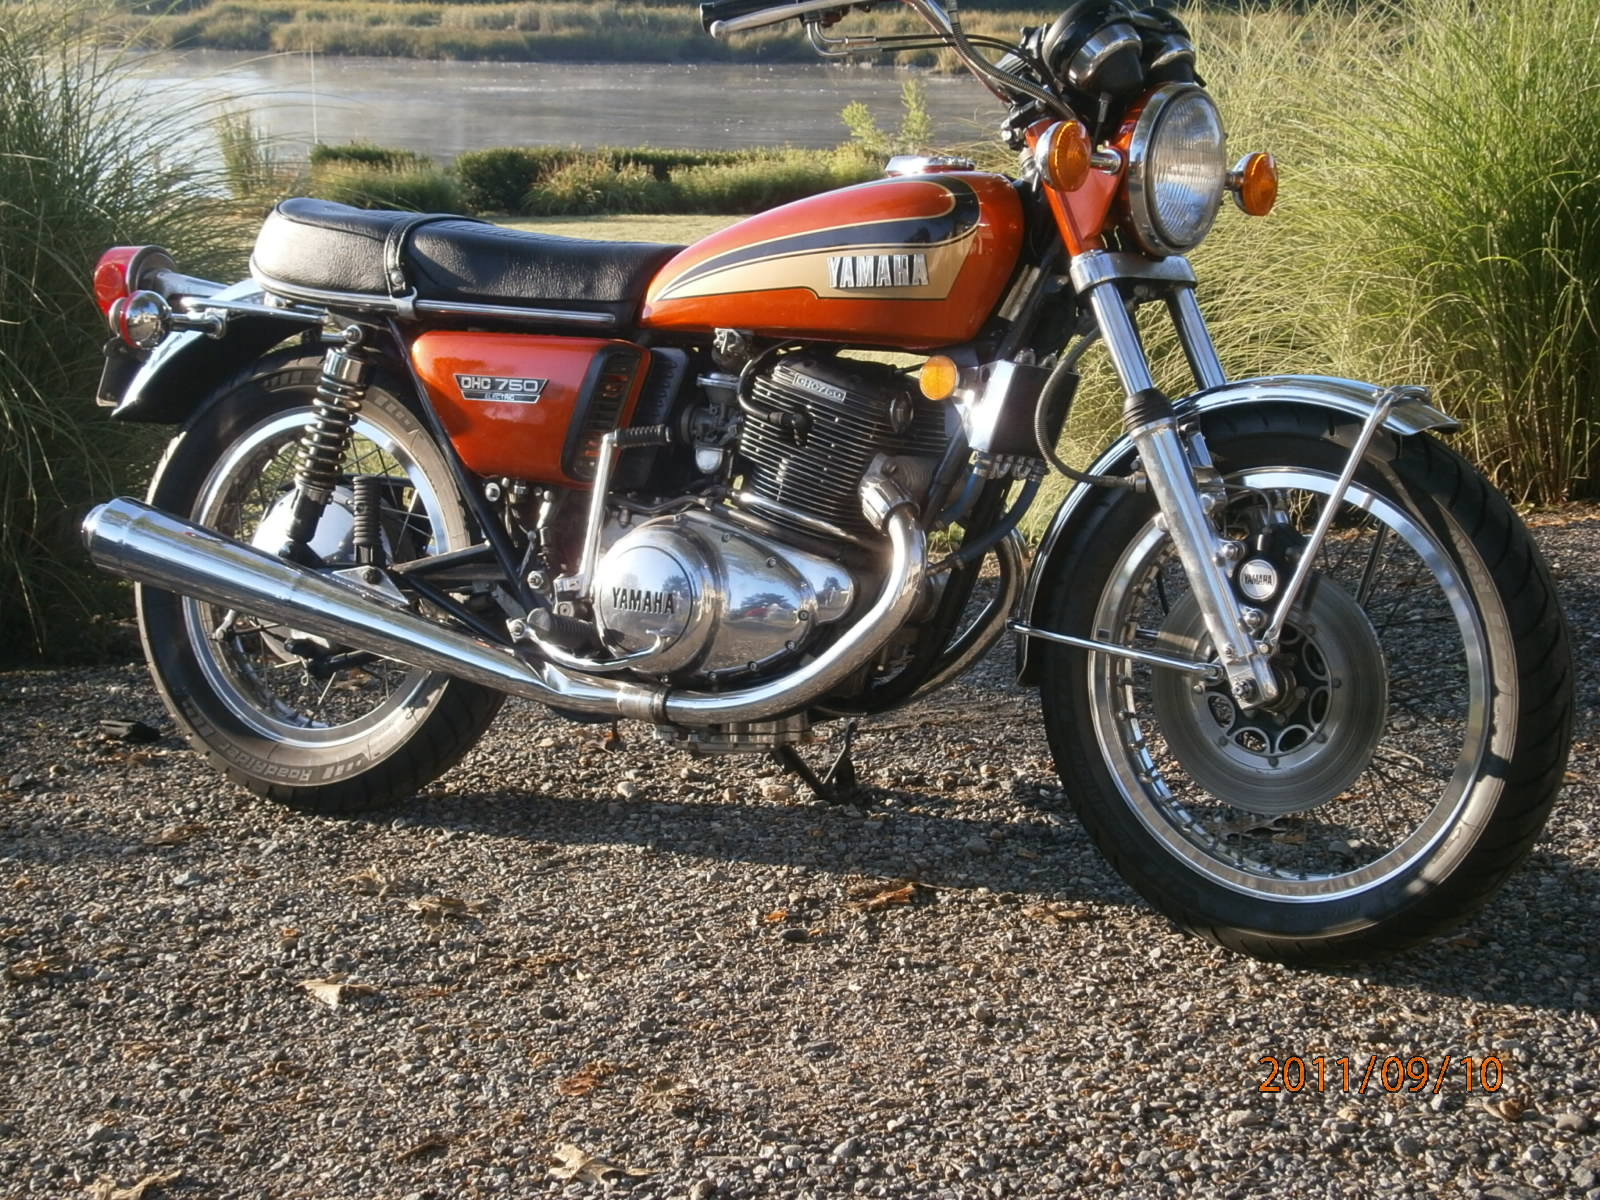 xs650 balance factor commando frame, any info on this?